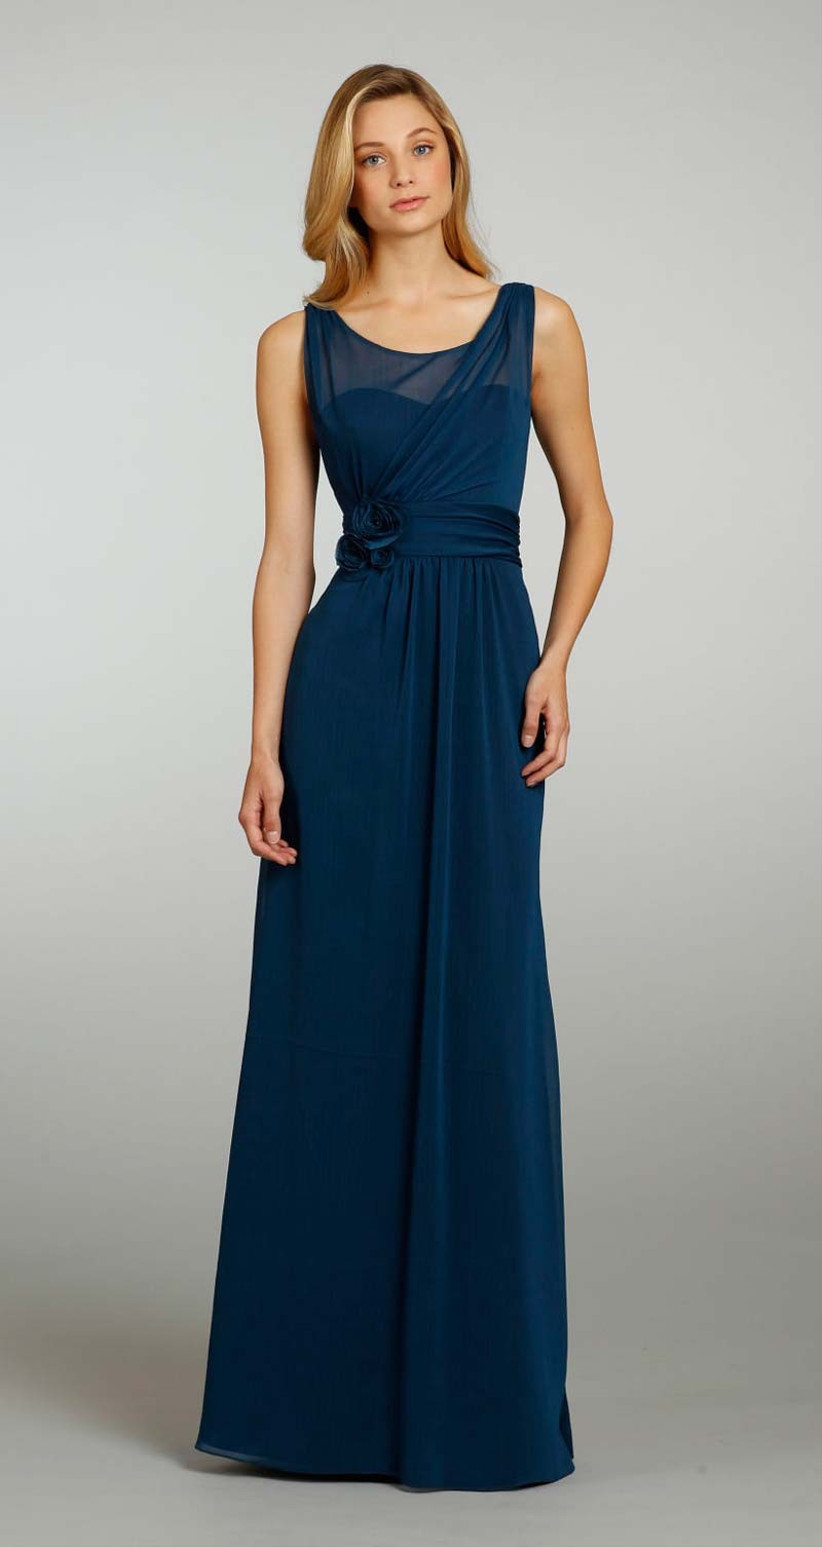 The Best Navy Bridesmaid Dresses - hitched.co.uk